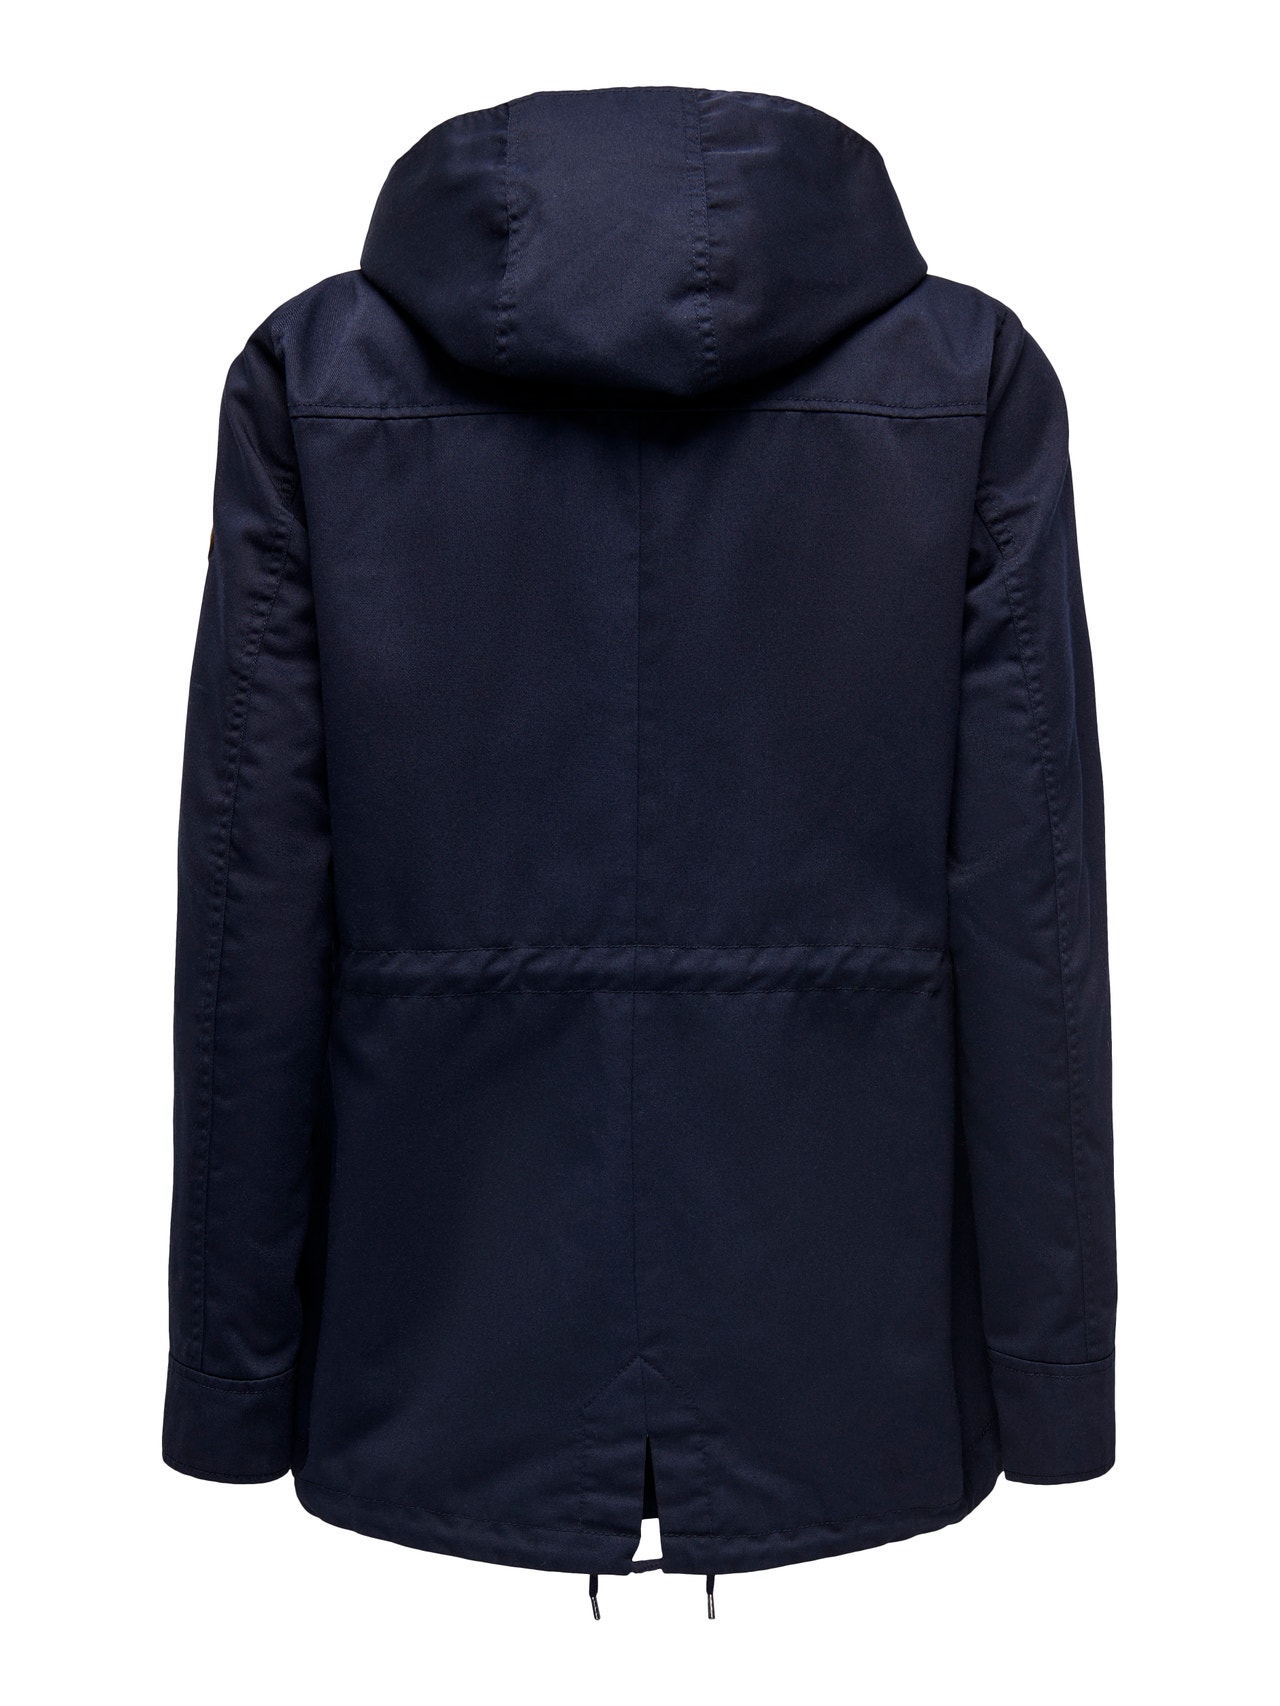 ONLY Hood Jacket -Blue Graphite - 15216452